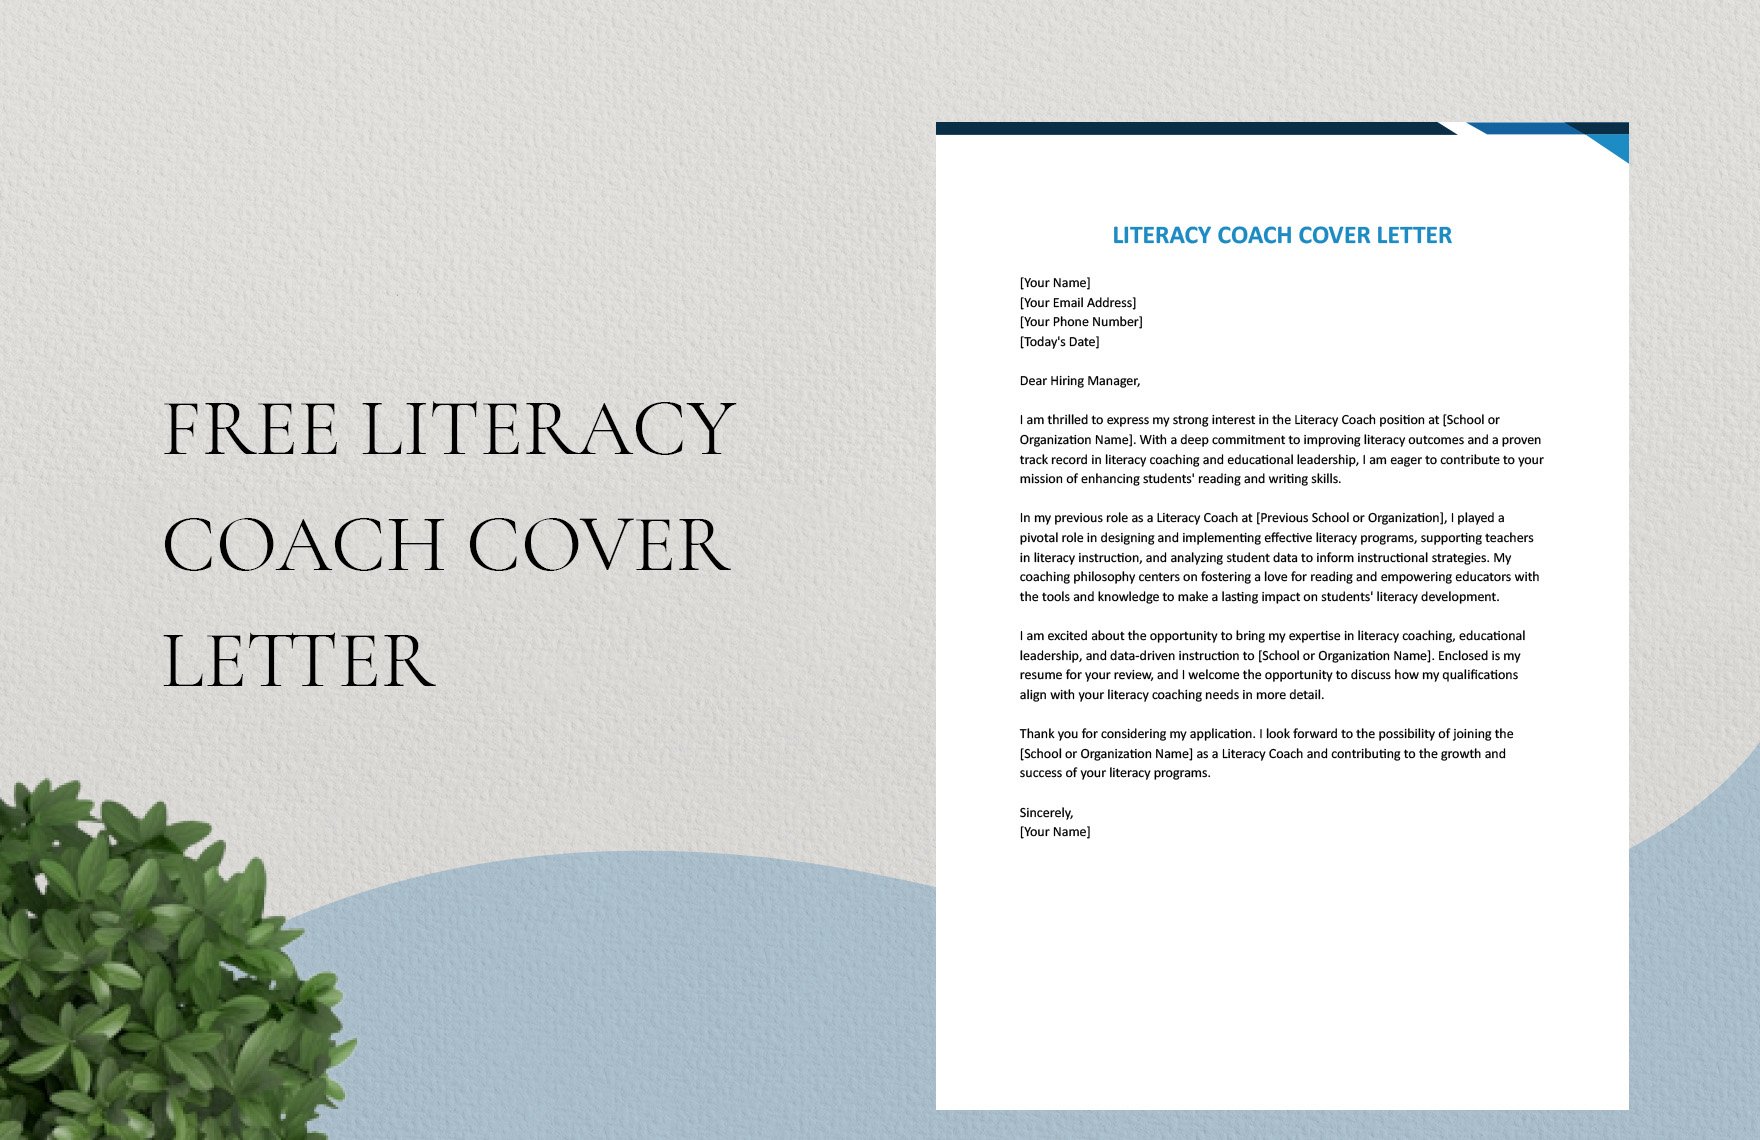 Literacy Coach Cover Letter in Word, Google Docs